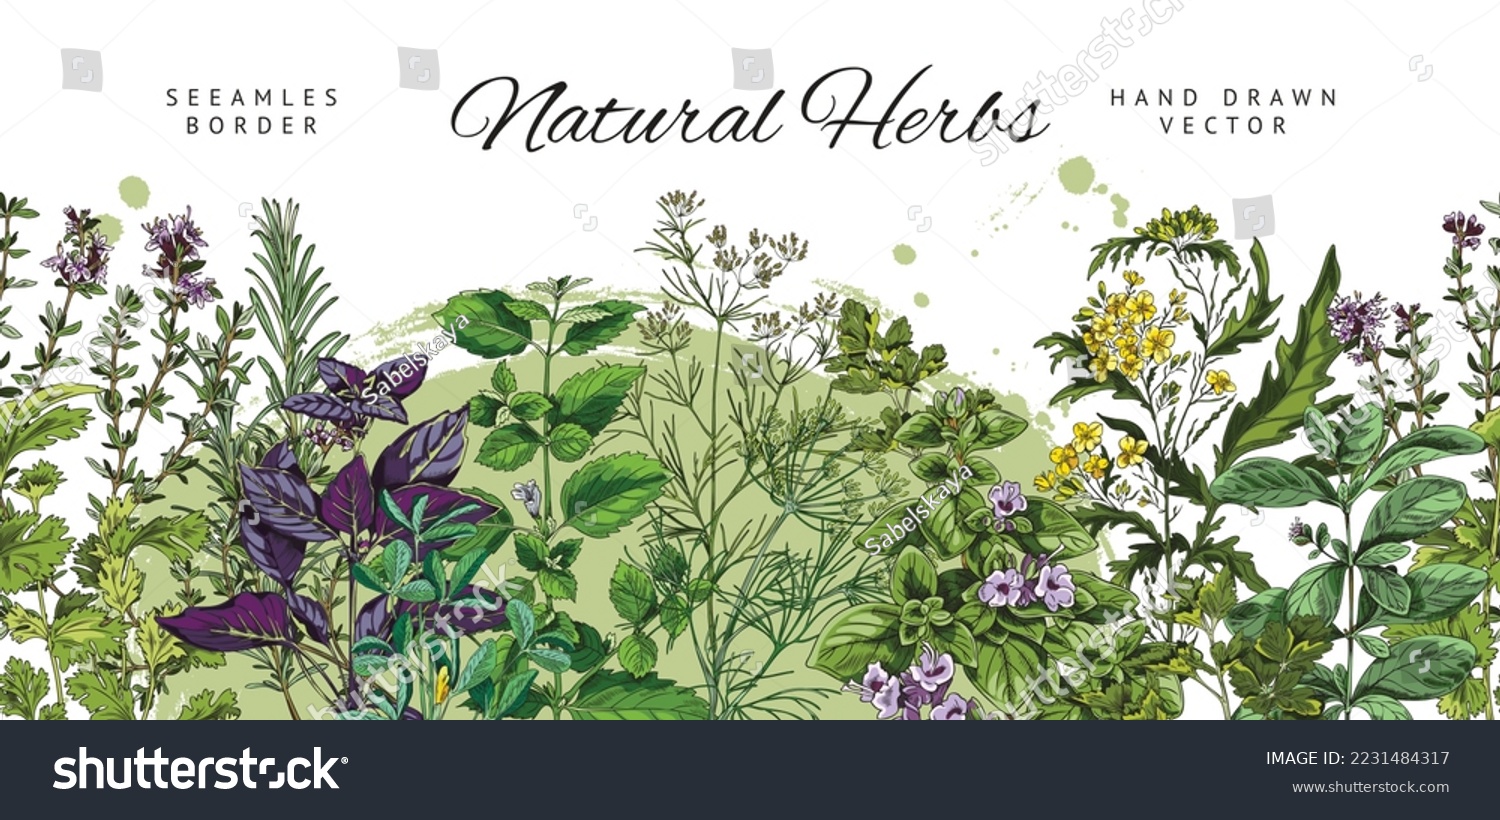 Seamless border design with natural culinary herbs, hand drawn colorful vector illustration isolated on white background. Repeatable decorative border with kitchen herbs. #2231484317